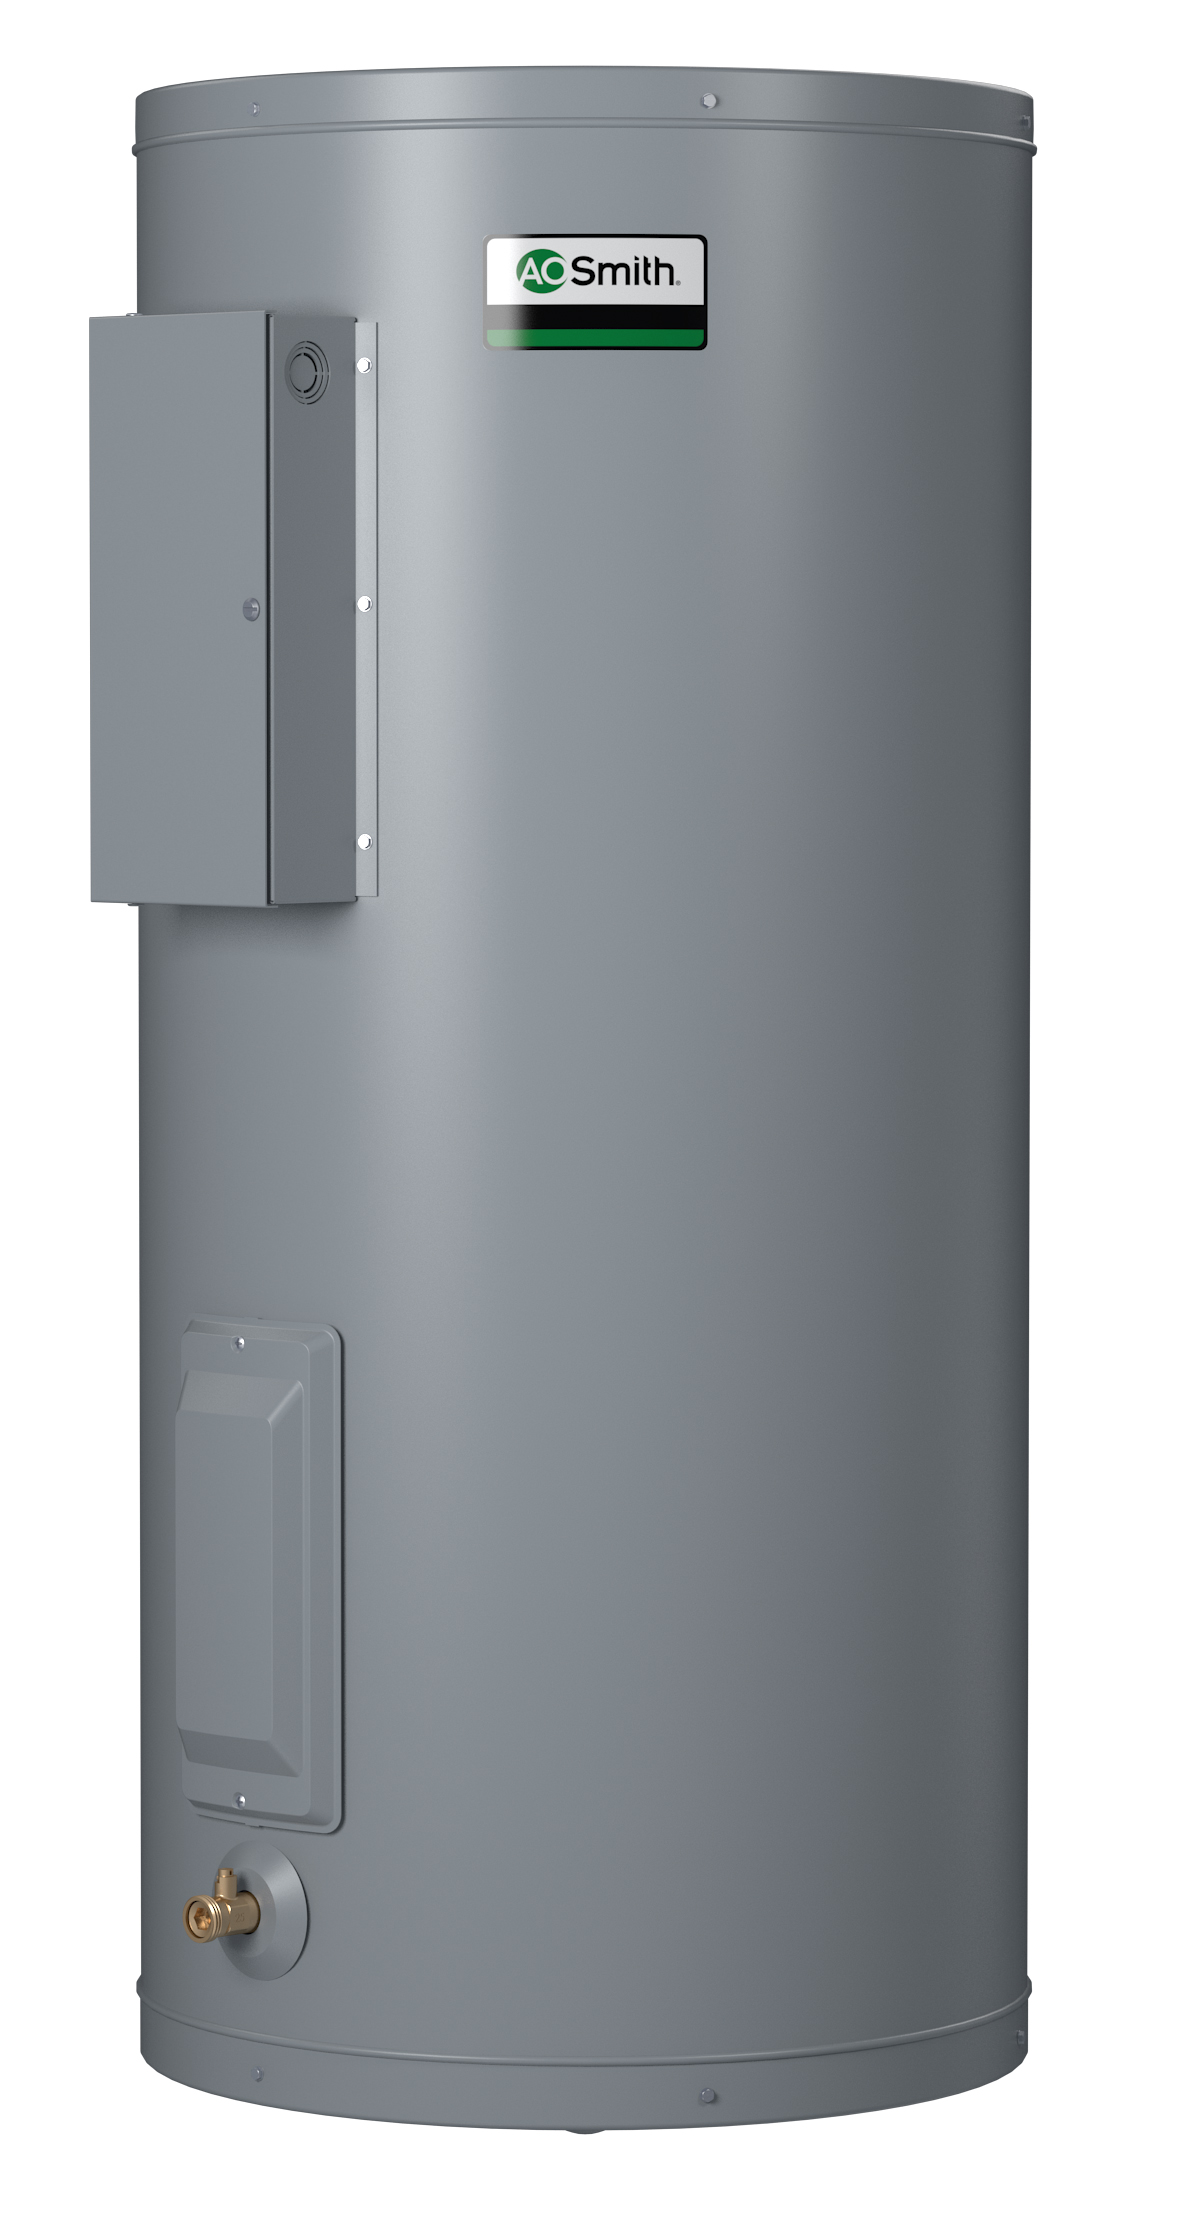 AO SMITH DEN-120D: 120 GALLONS, 2.0KW, 480 VOLT, 1 PHASE, (2-2000 WATT ELEMENTS, NON-SIMULTANEOUS WIRING), DURA-POWER, LIGHT DUTY COMMERCIAL ELECTRIC WATER HEATER